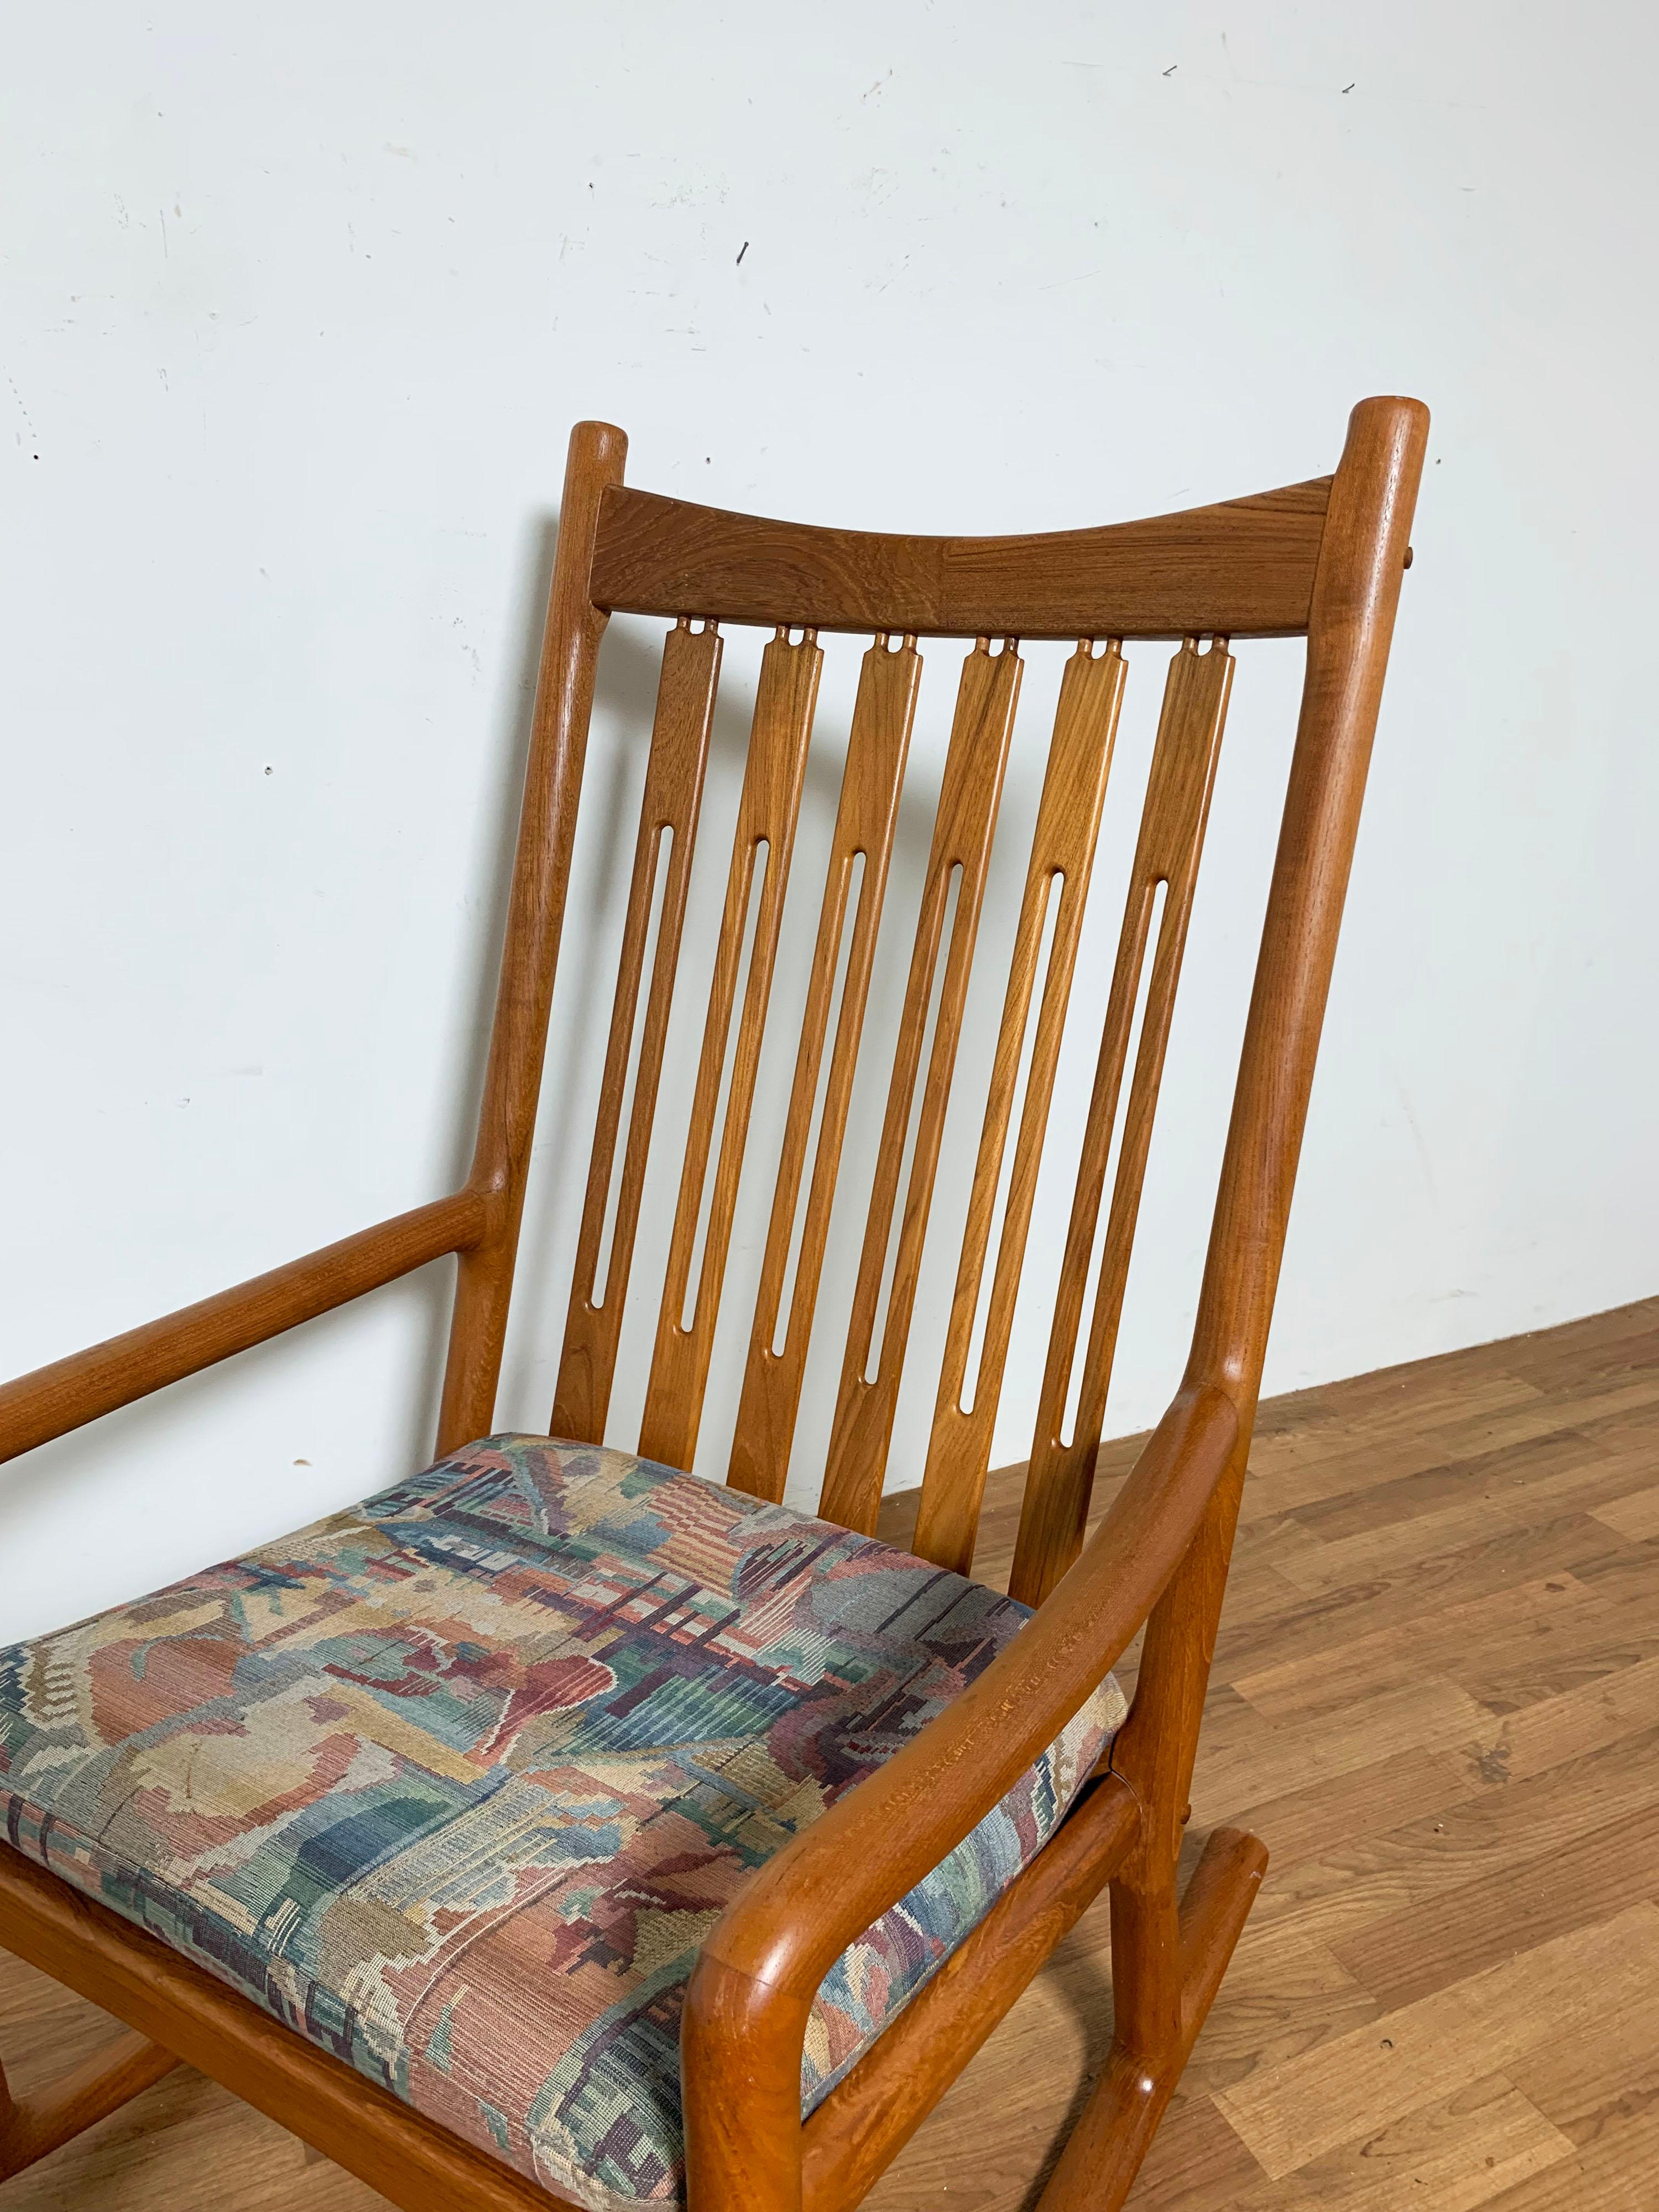 Danish teak rocking chair by Jacob Kjaer, with removable head pillow, circa 1960s.